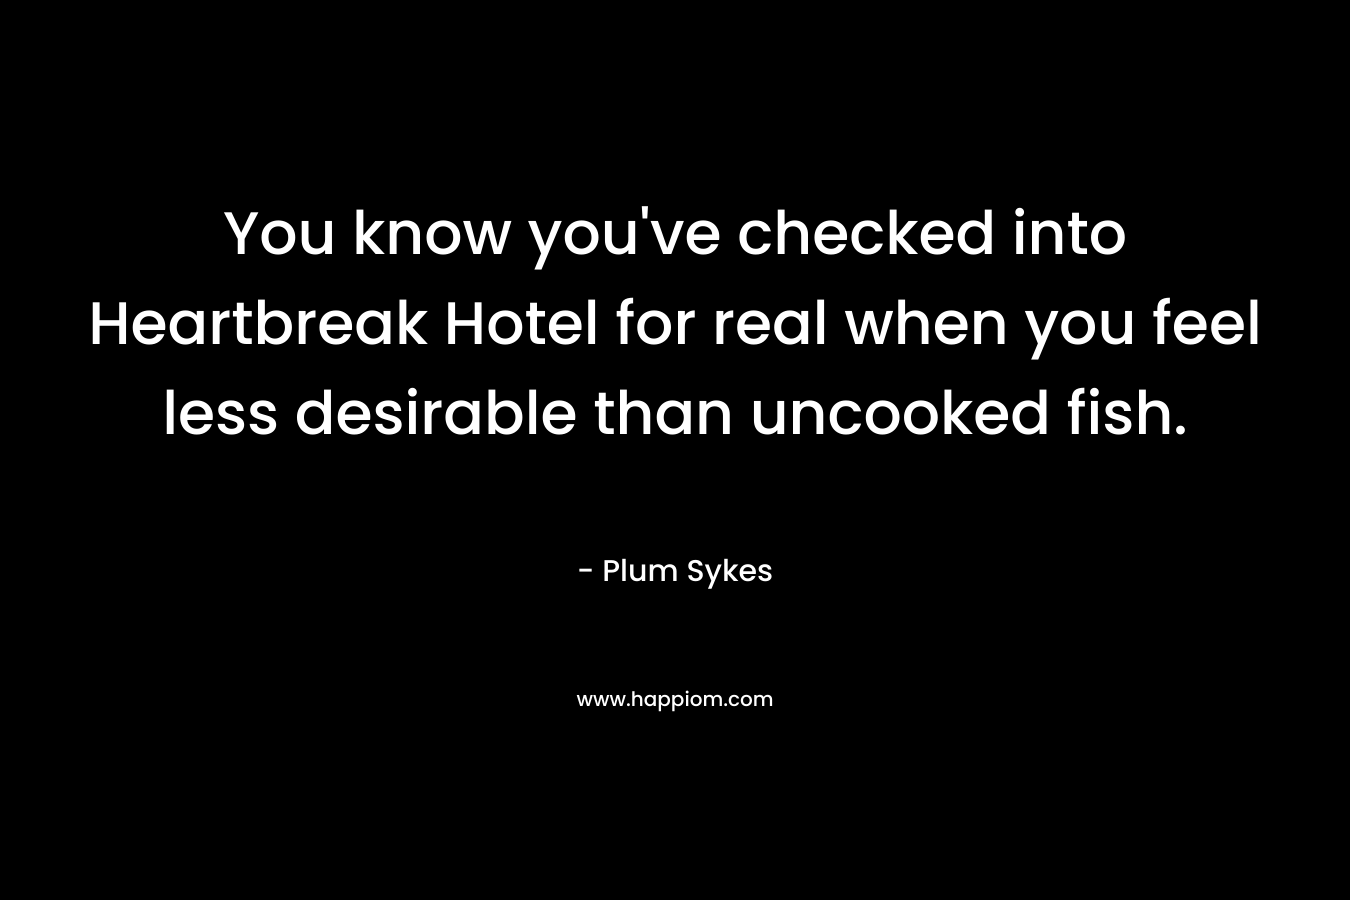 You know you’ve checked into Heartbreak Hotel for real when you feel less desirable than uncooked fish. – Plum Sykes